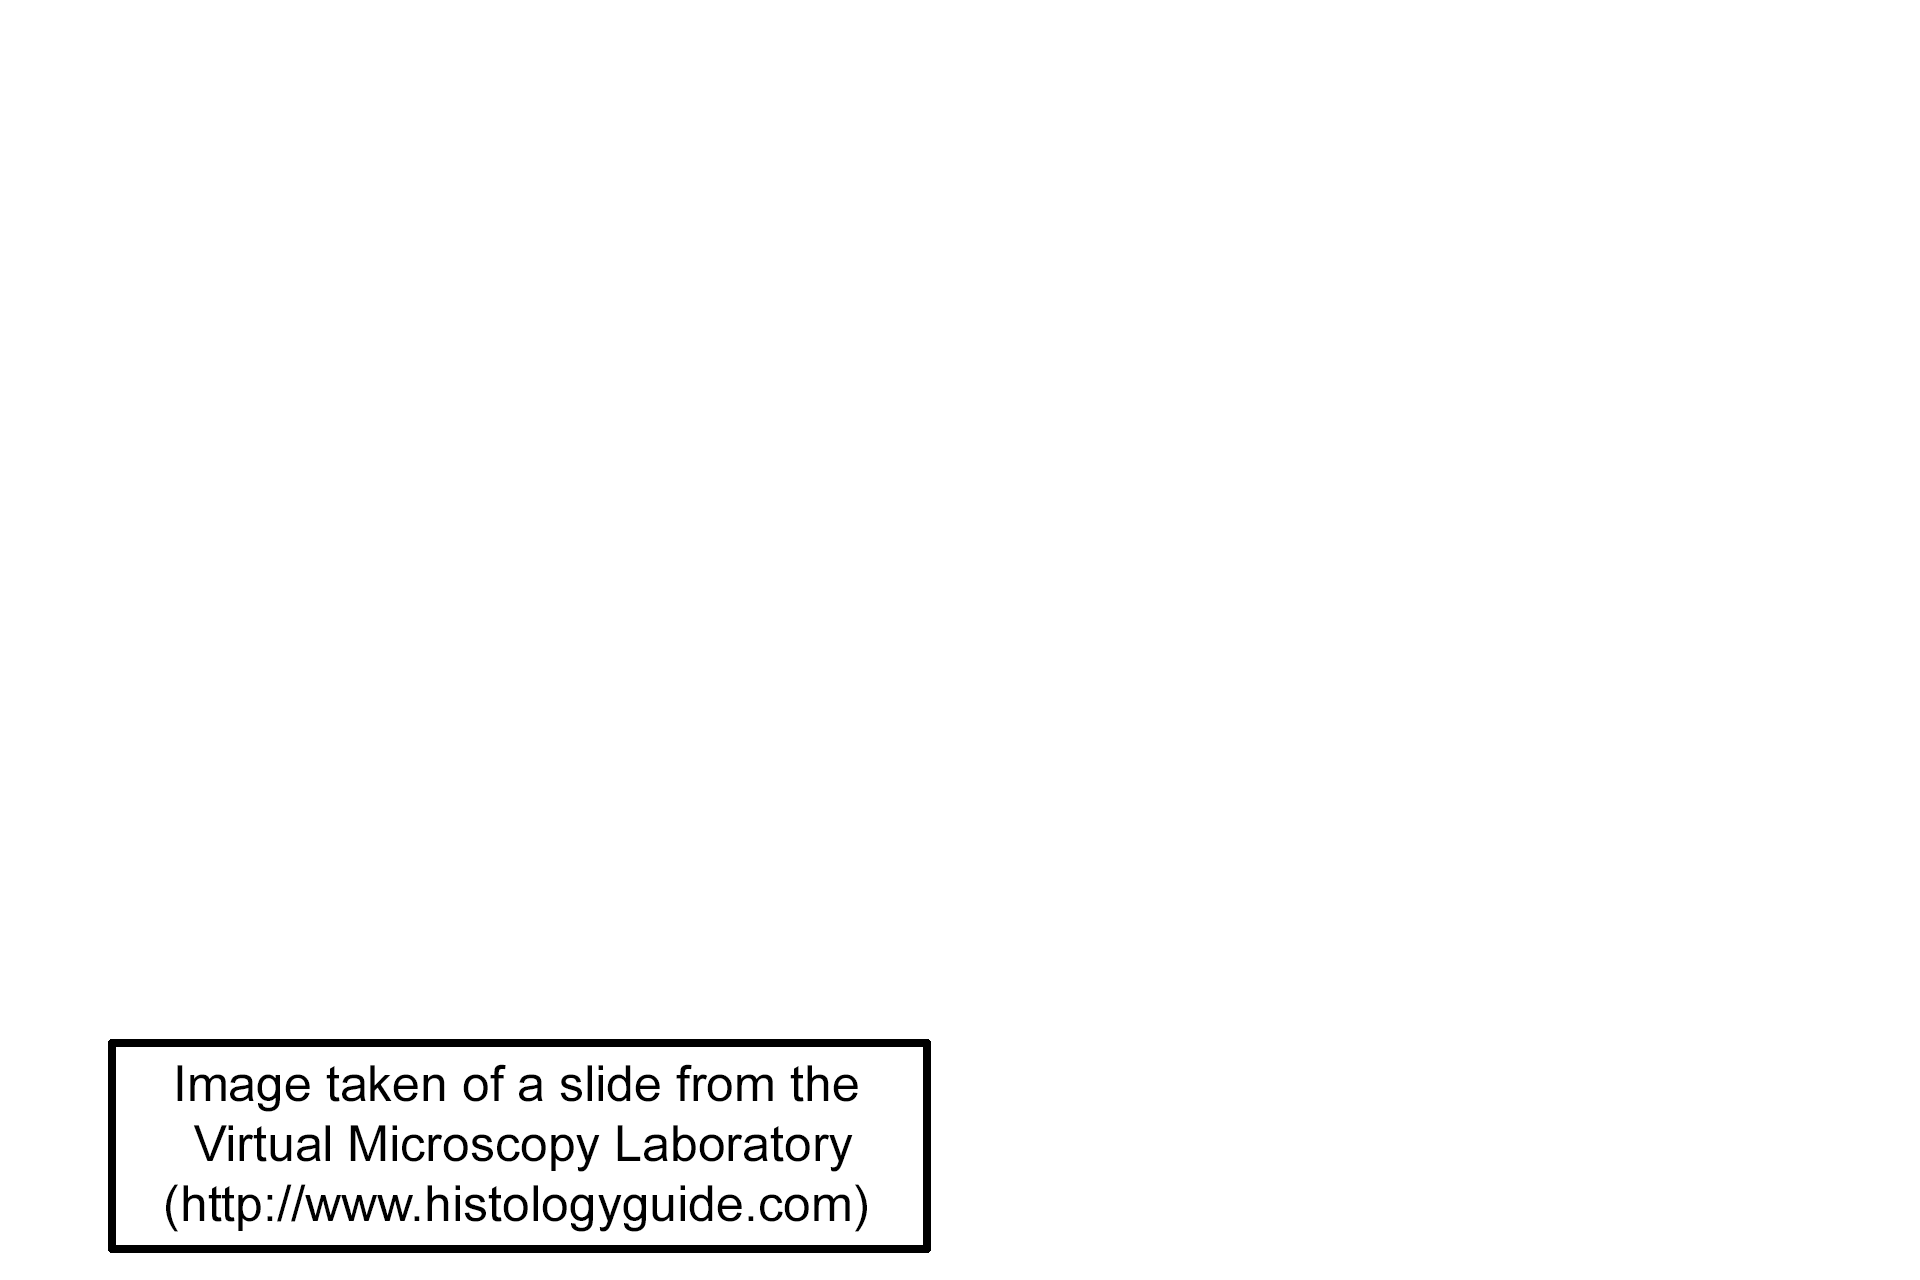 Image credit > <p>Image taken of a slide from the Virtual Microscopy Laboratory (http://www.histologyguide.com)</p>
